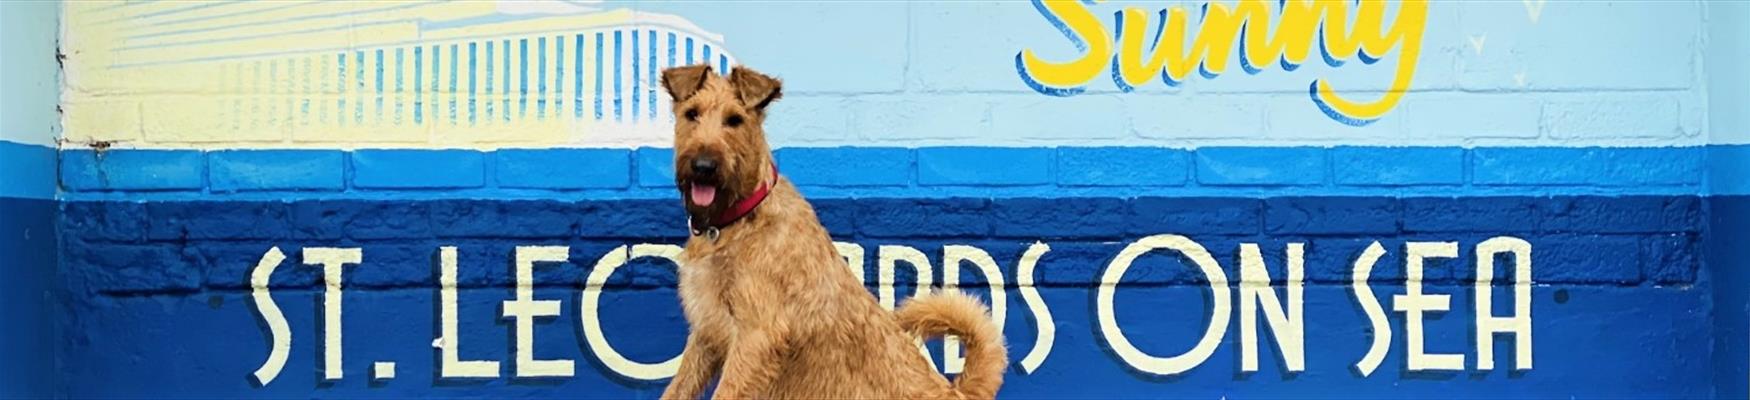 terrier in front of painted wall saying sunny st leonards on sea